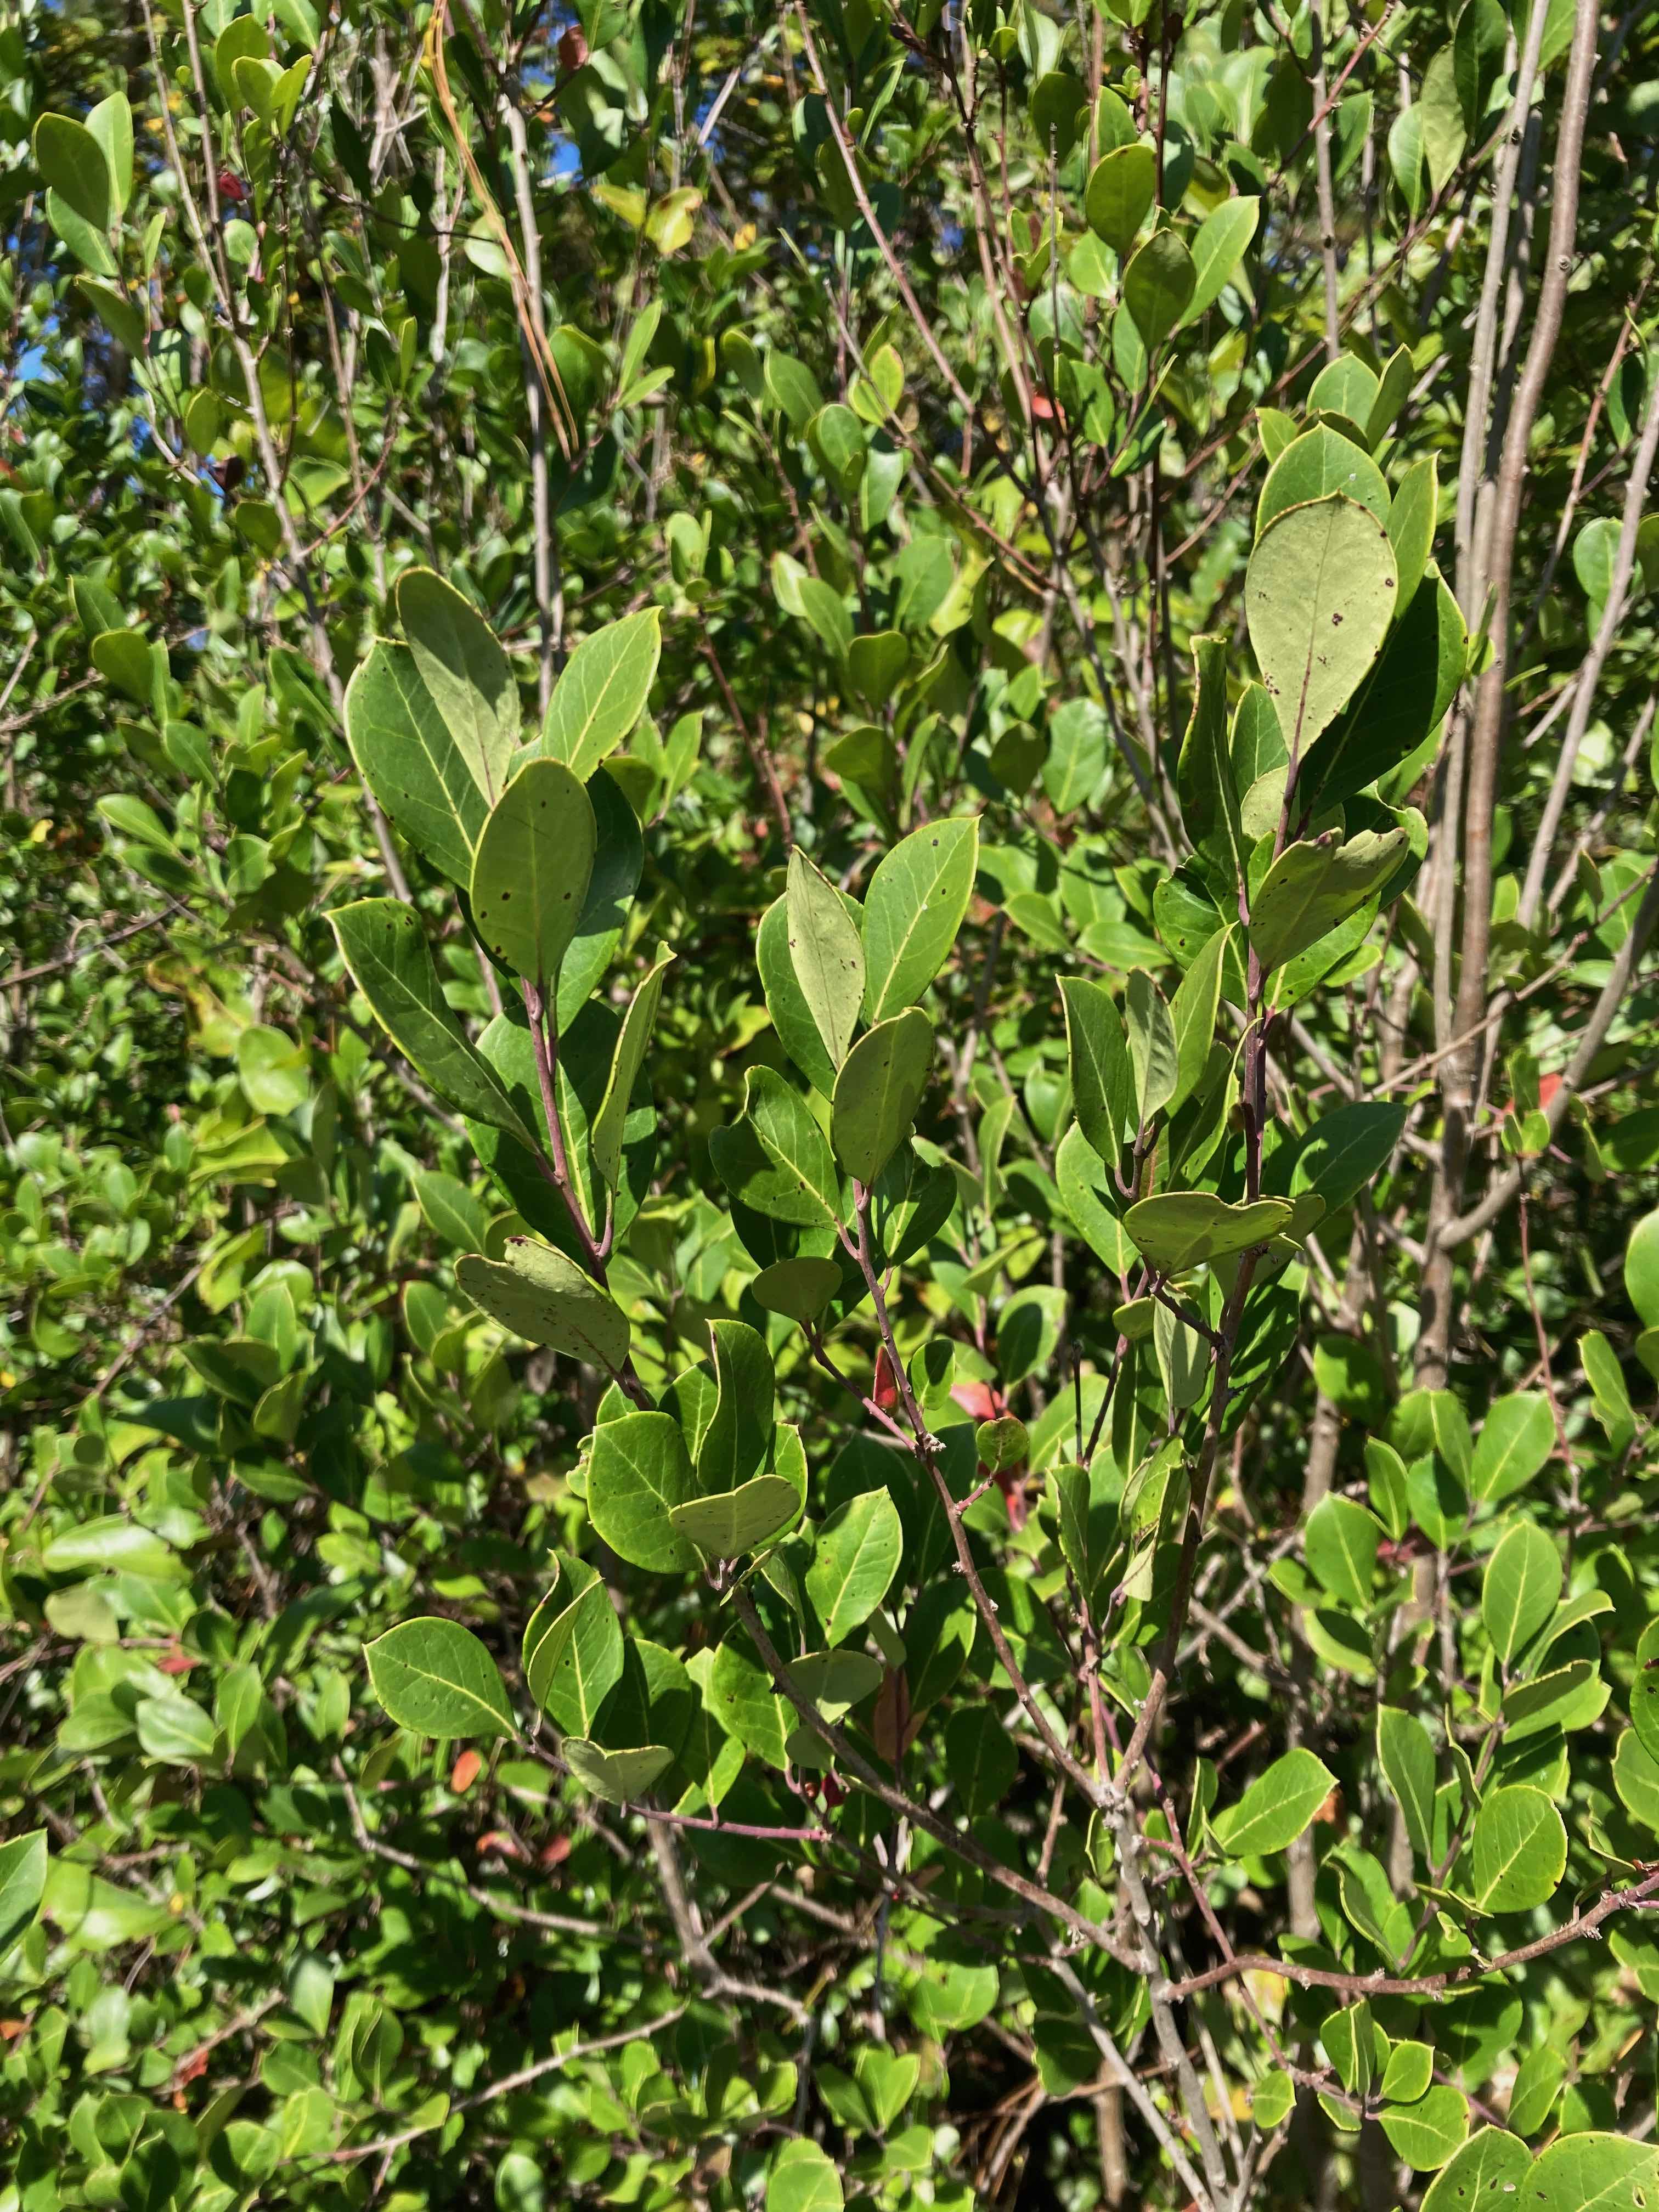 The Scientific Name is Ilex coriacea. You will likely hear them called Big Gallberry, Sweet Gallberry. This picture shows the Large, evergreen shrub with upward reaching branches. Leaves tend to be wider near the tip (obovate). of Ilex coriacea